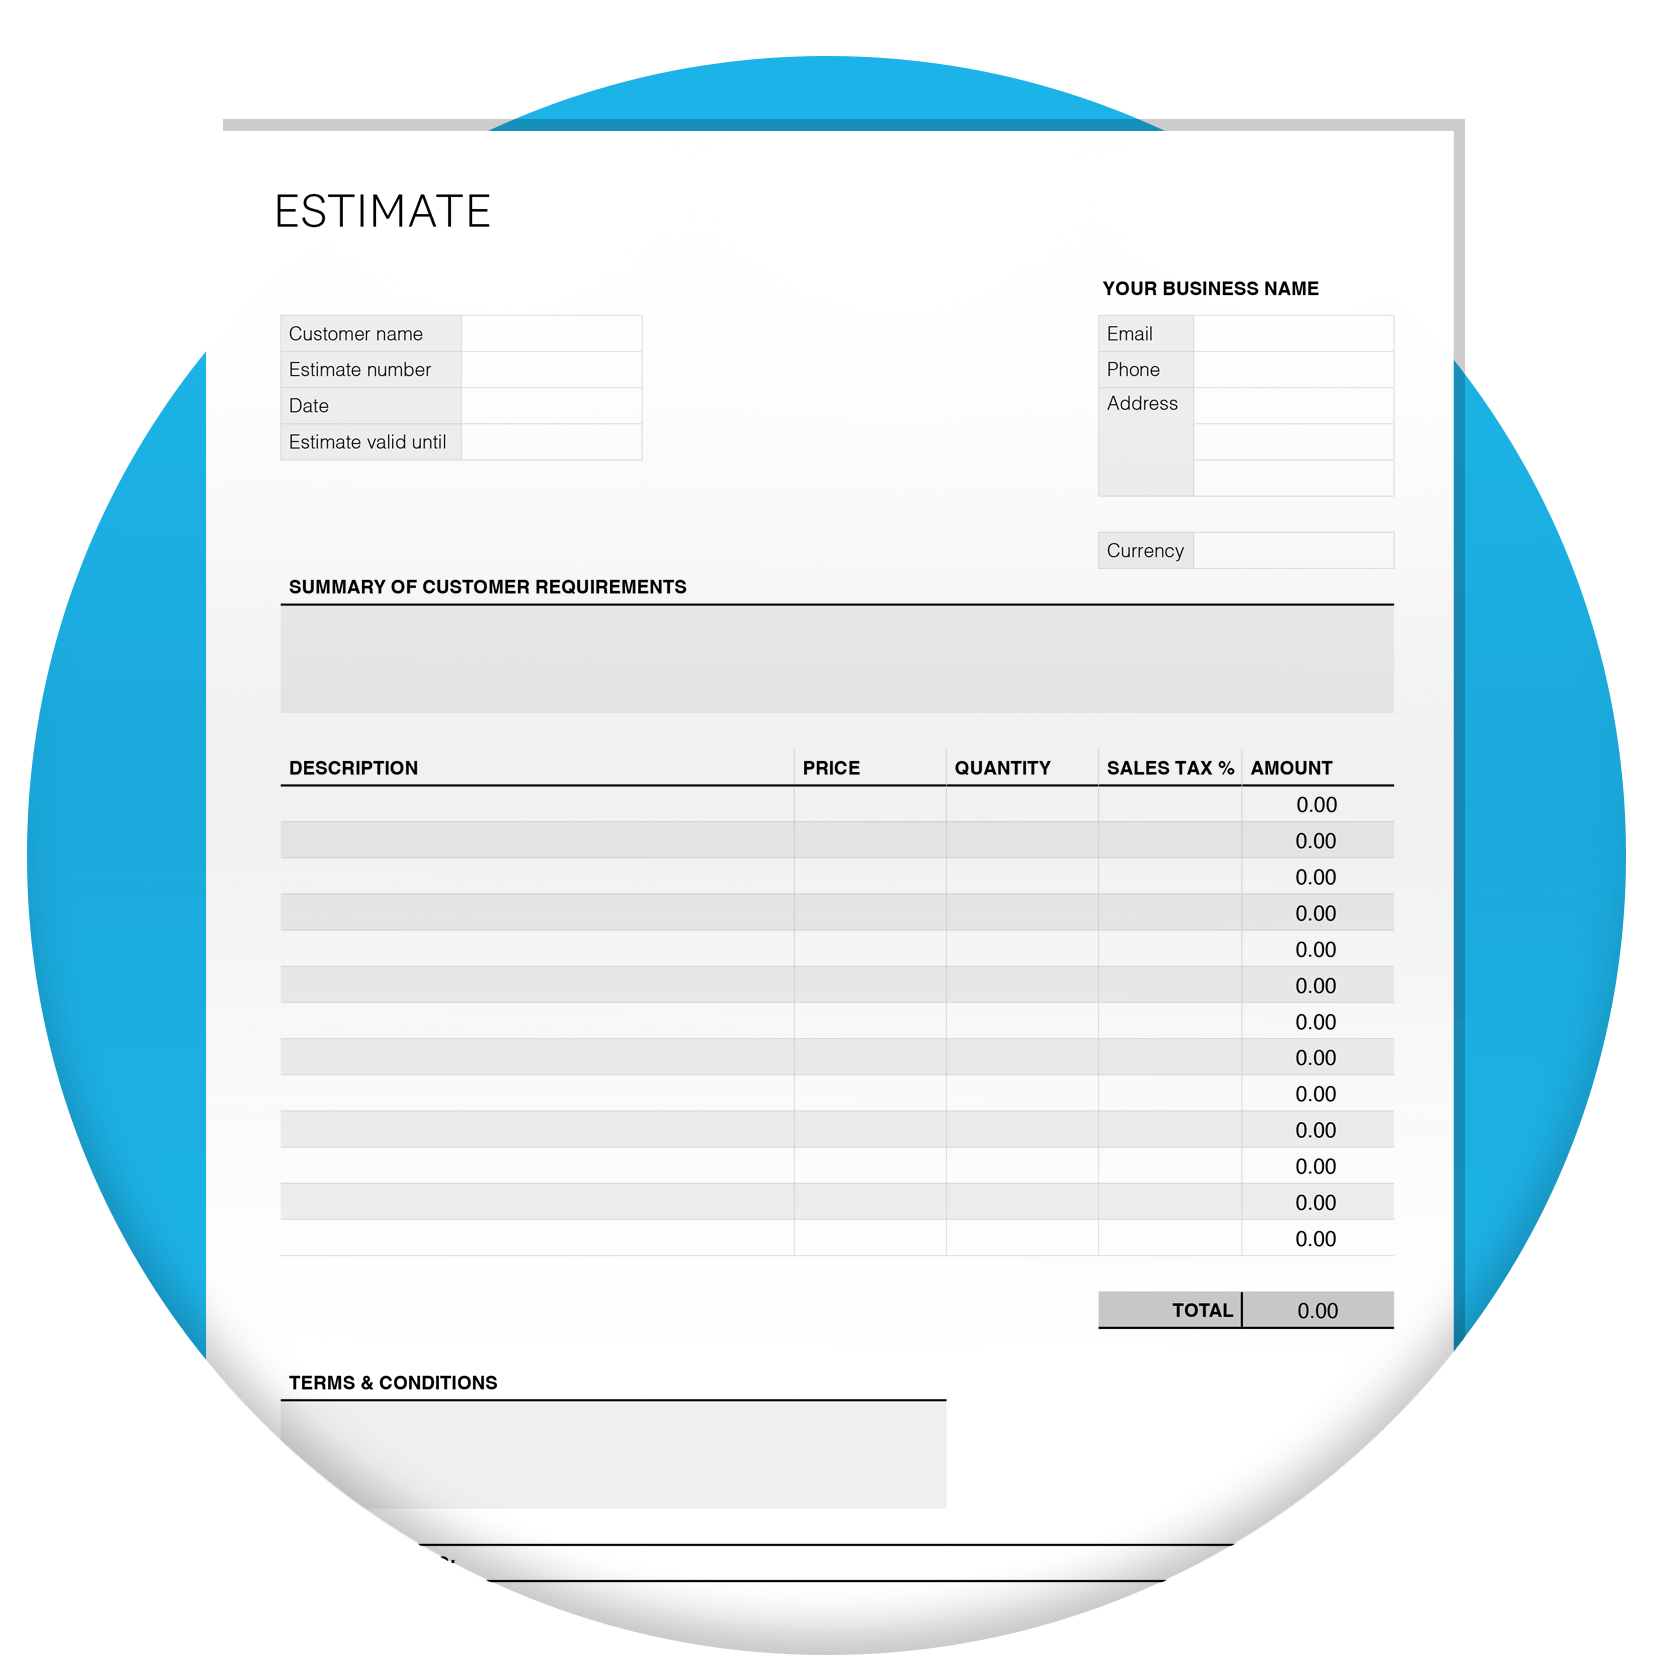 Estimate template with blank fields for users to fill out.